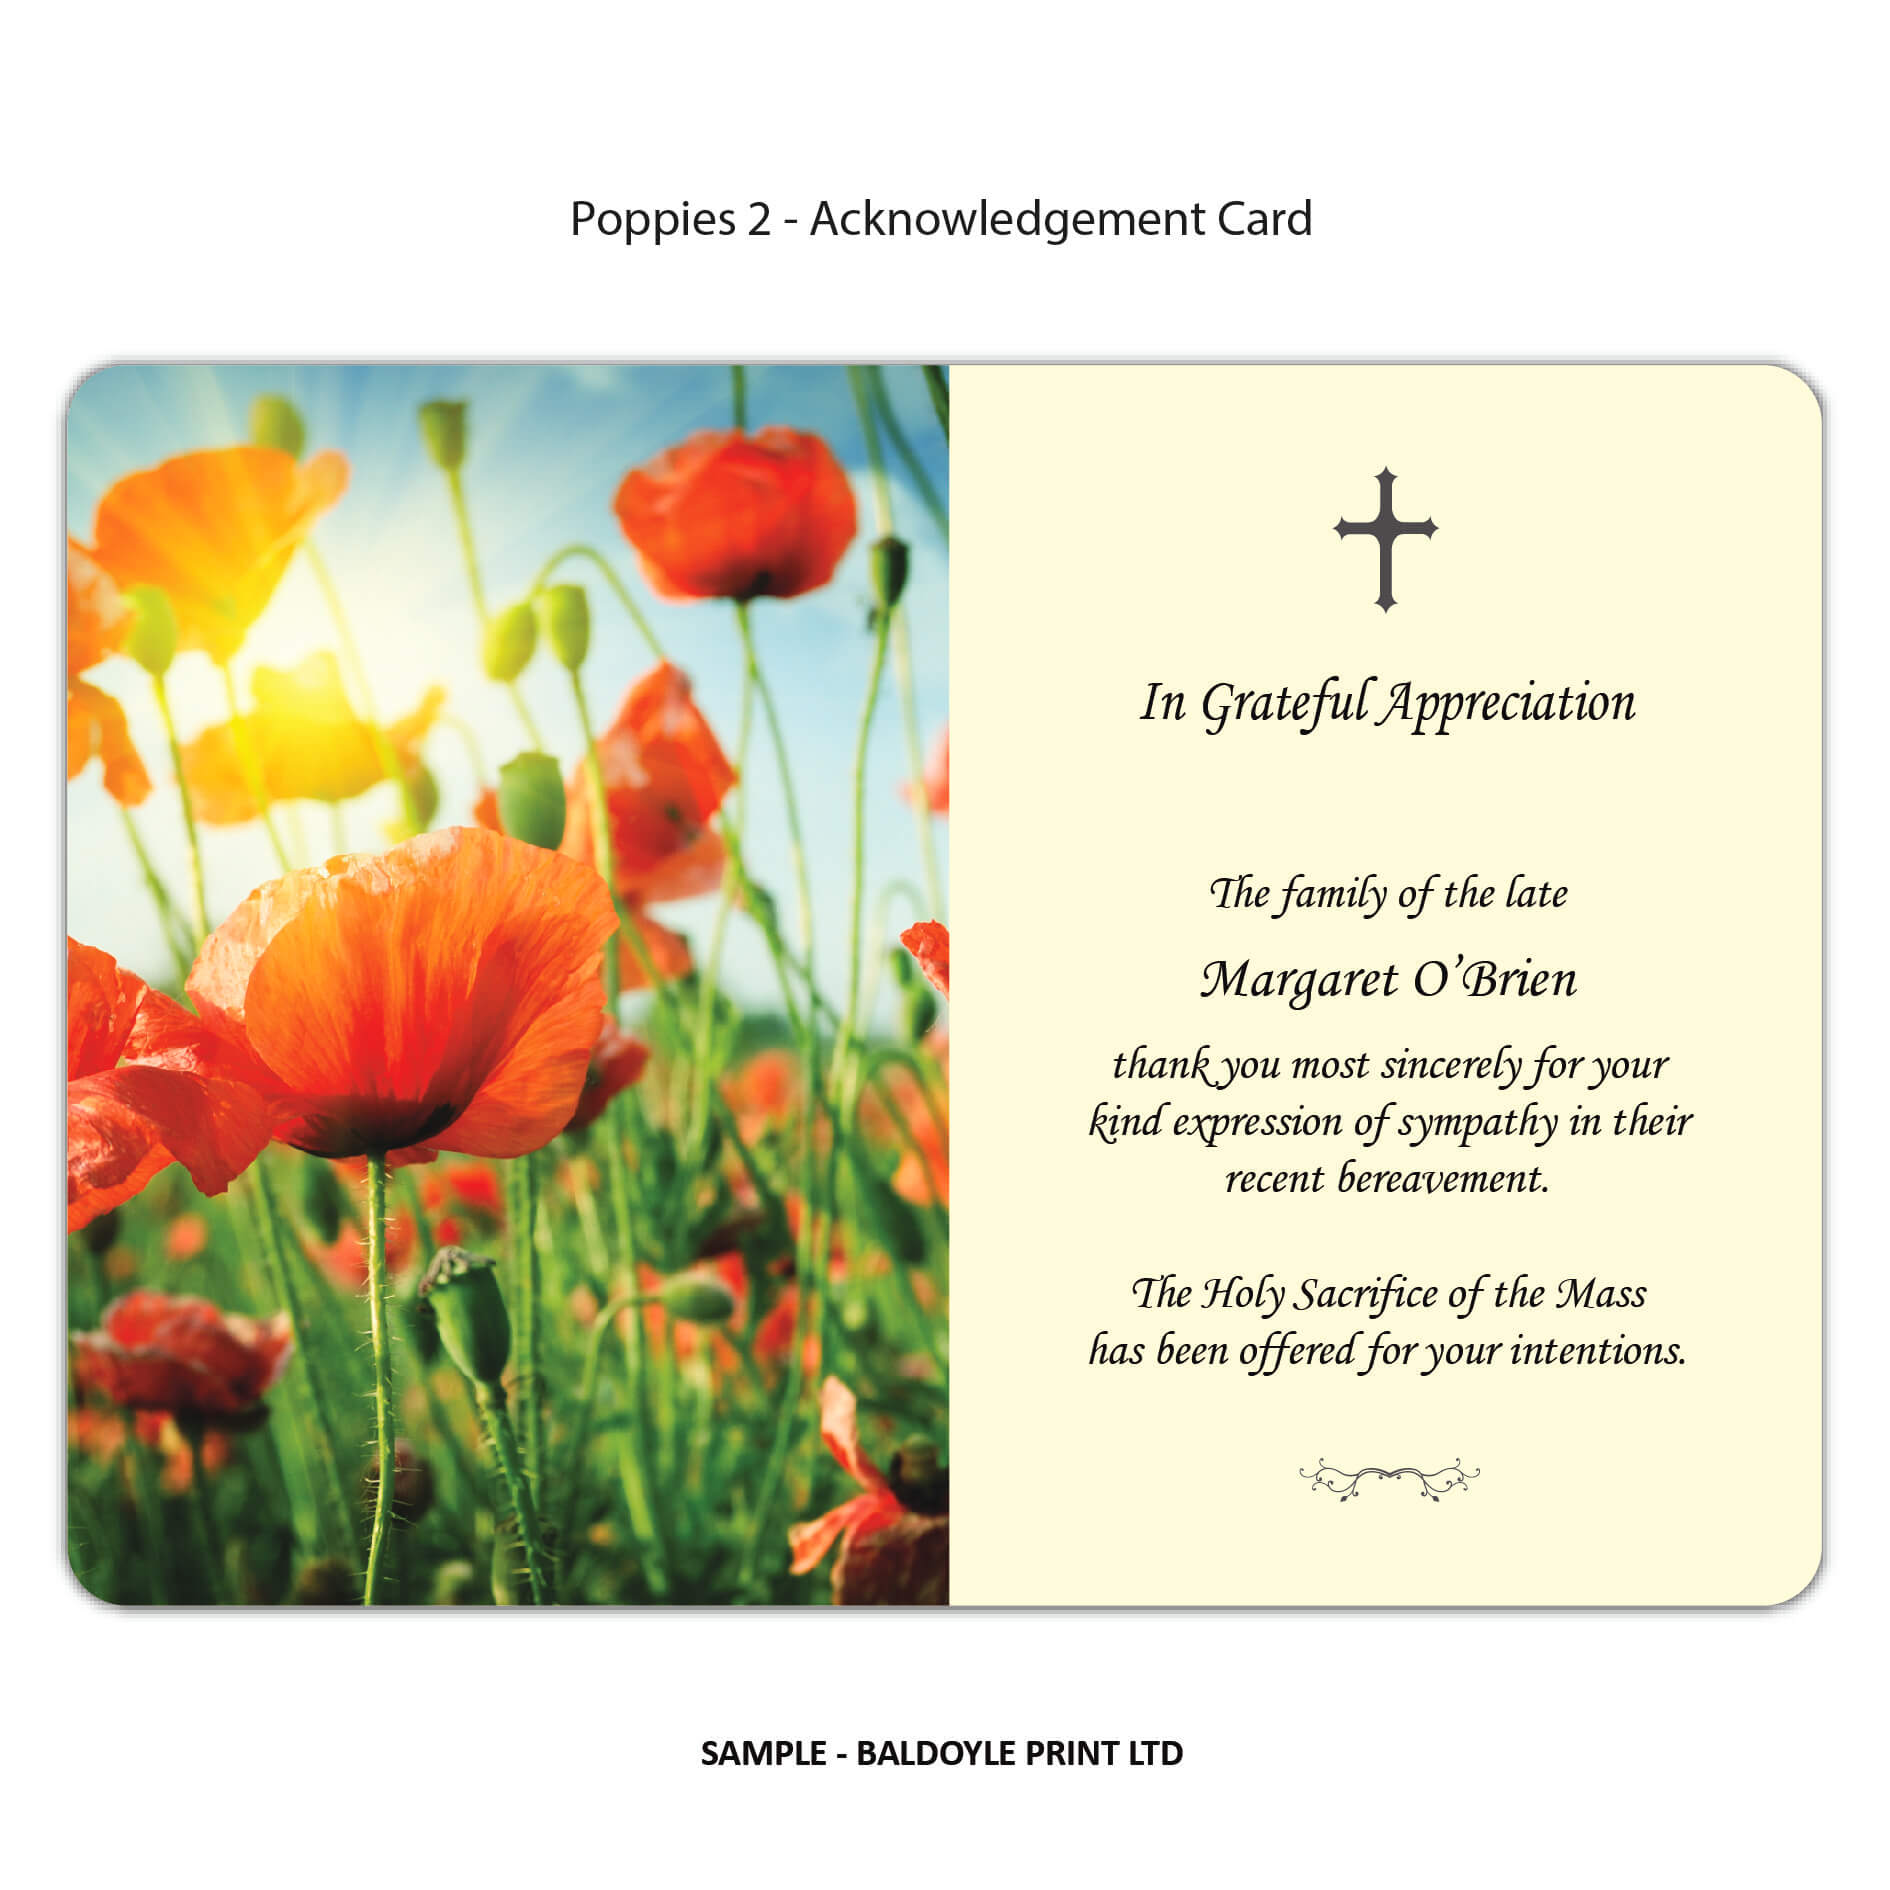 Poppies 2 Acknowledgement Card